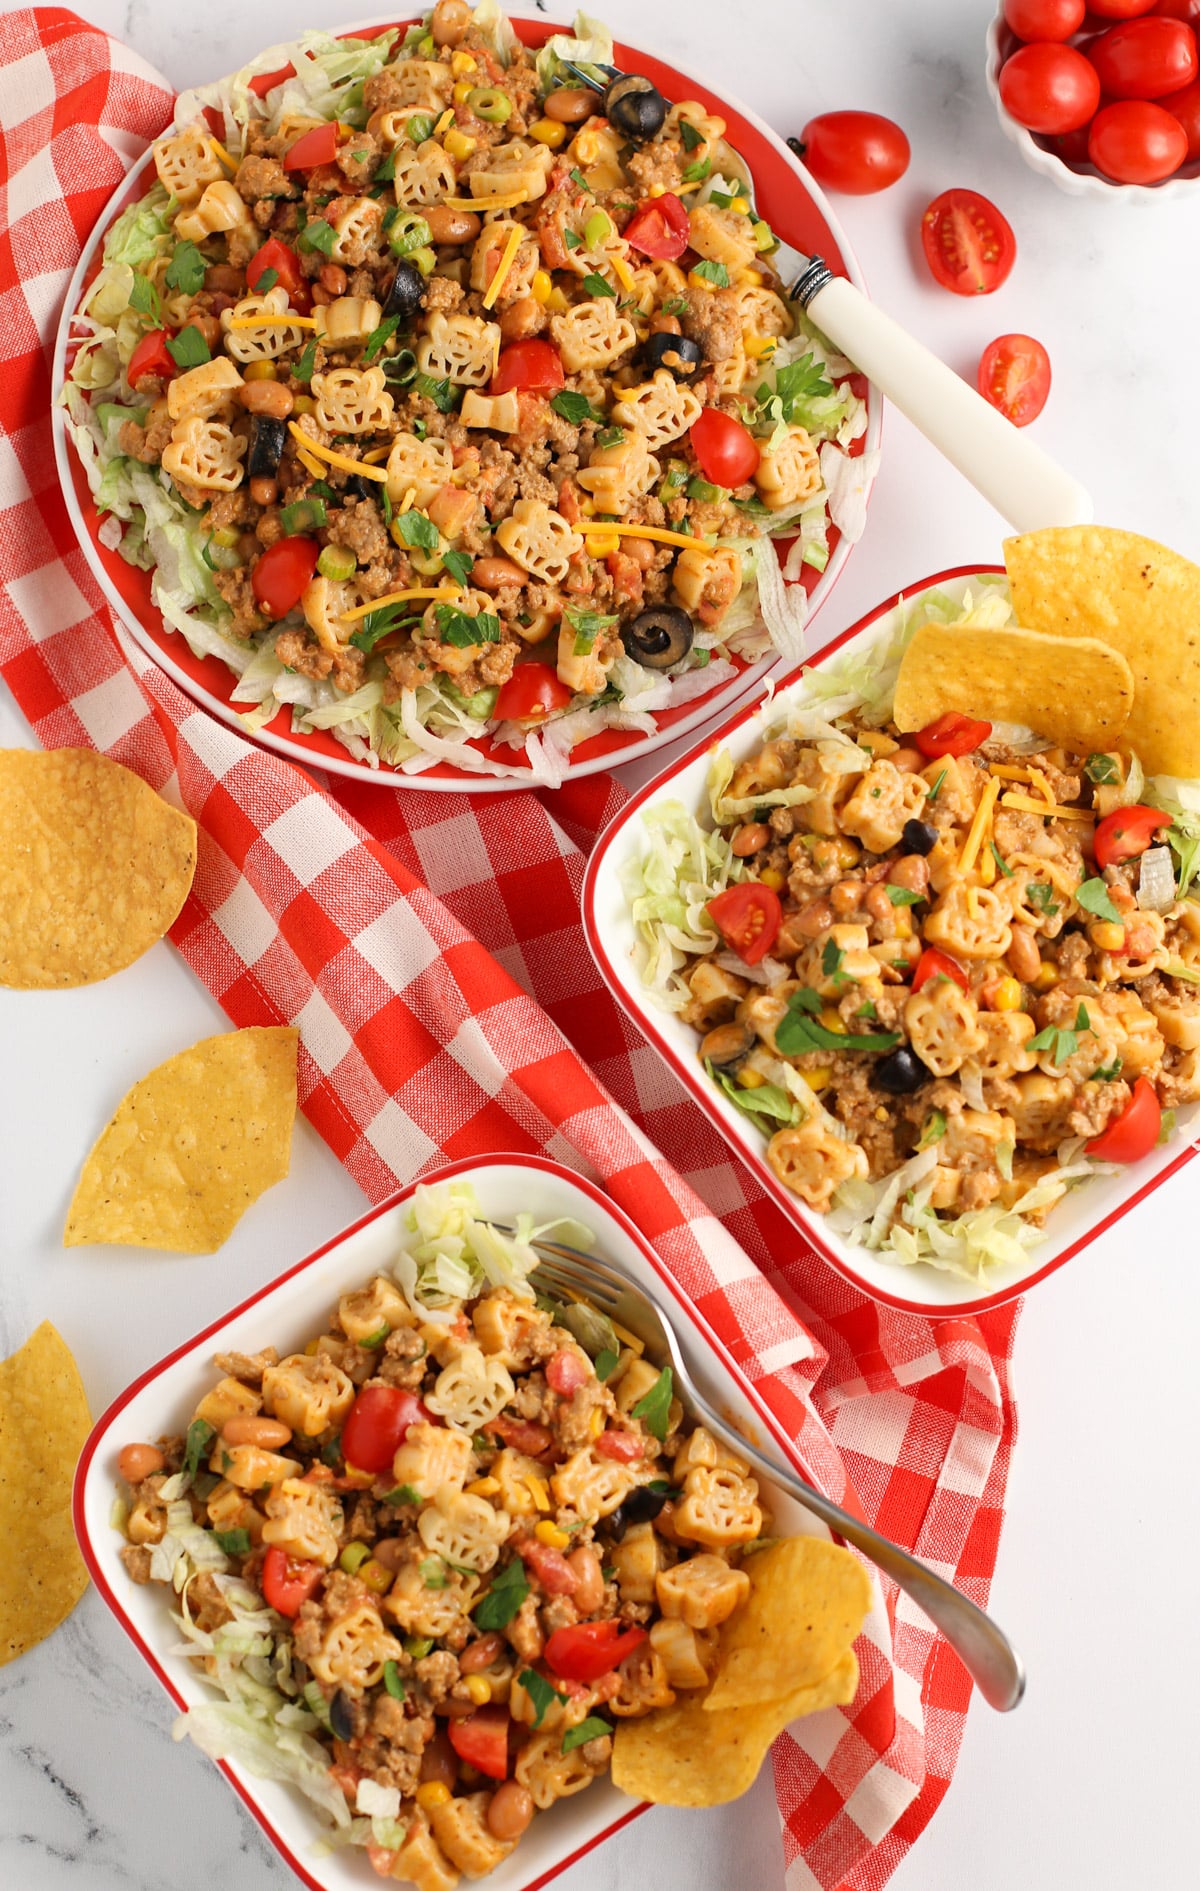 Large serving bowl of Turkey Taco Pasta with two small pasta bowls